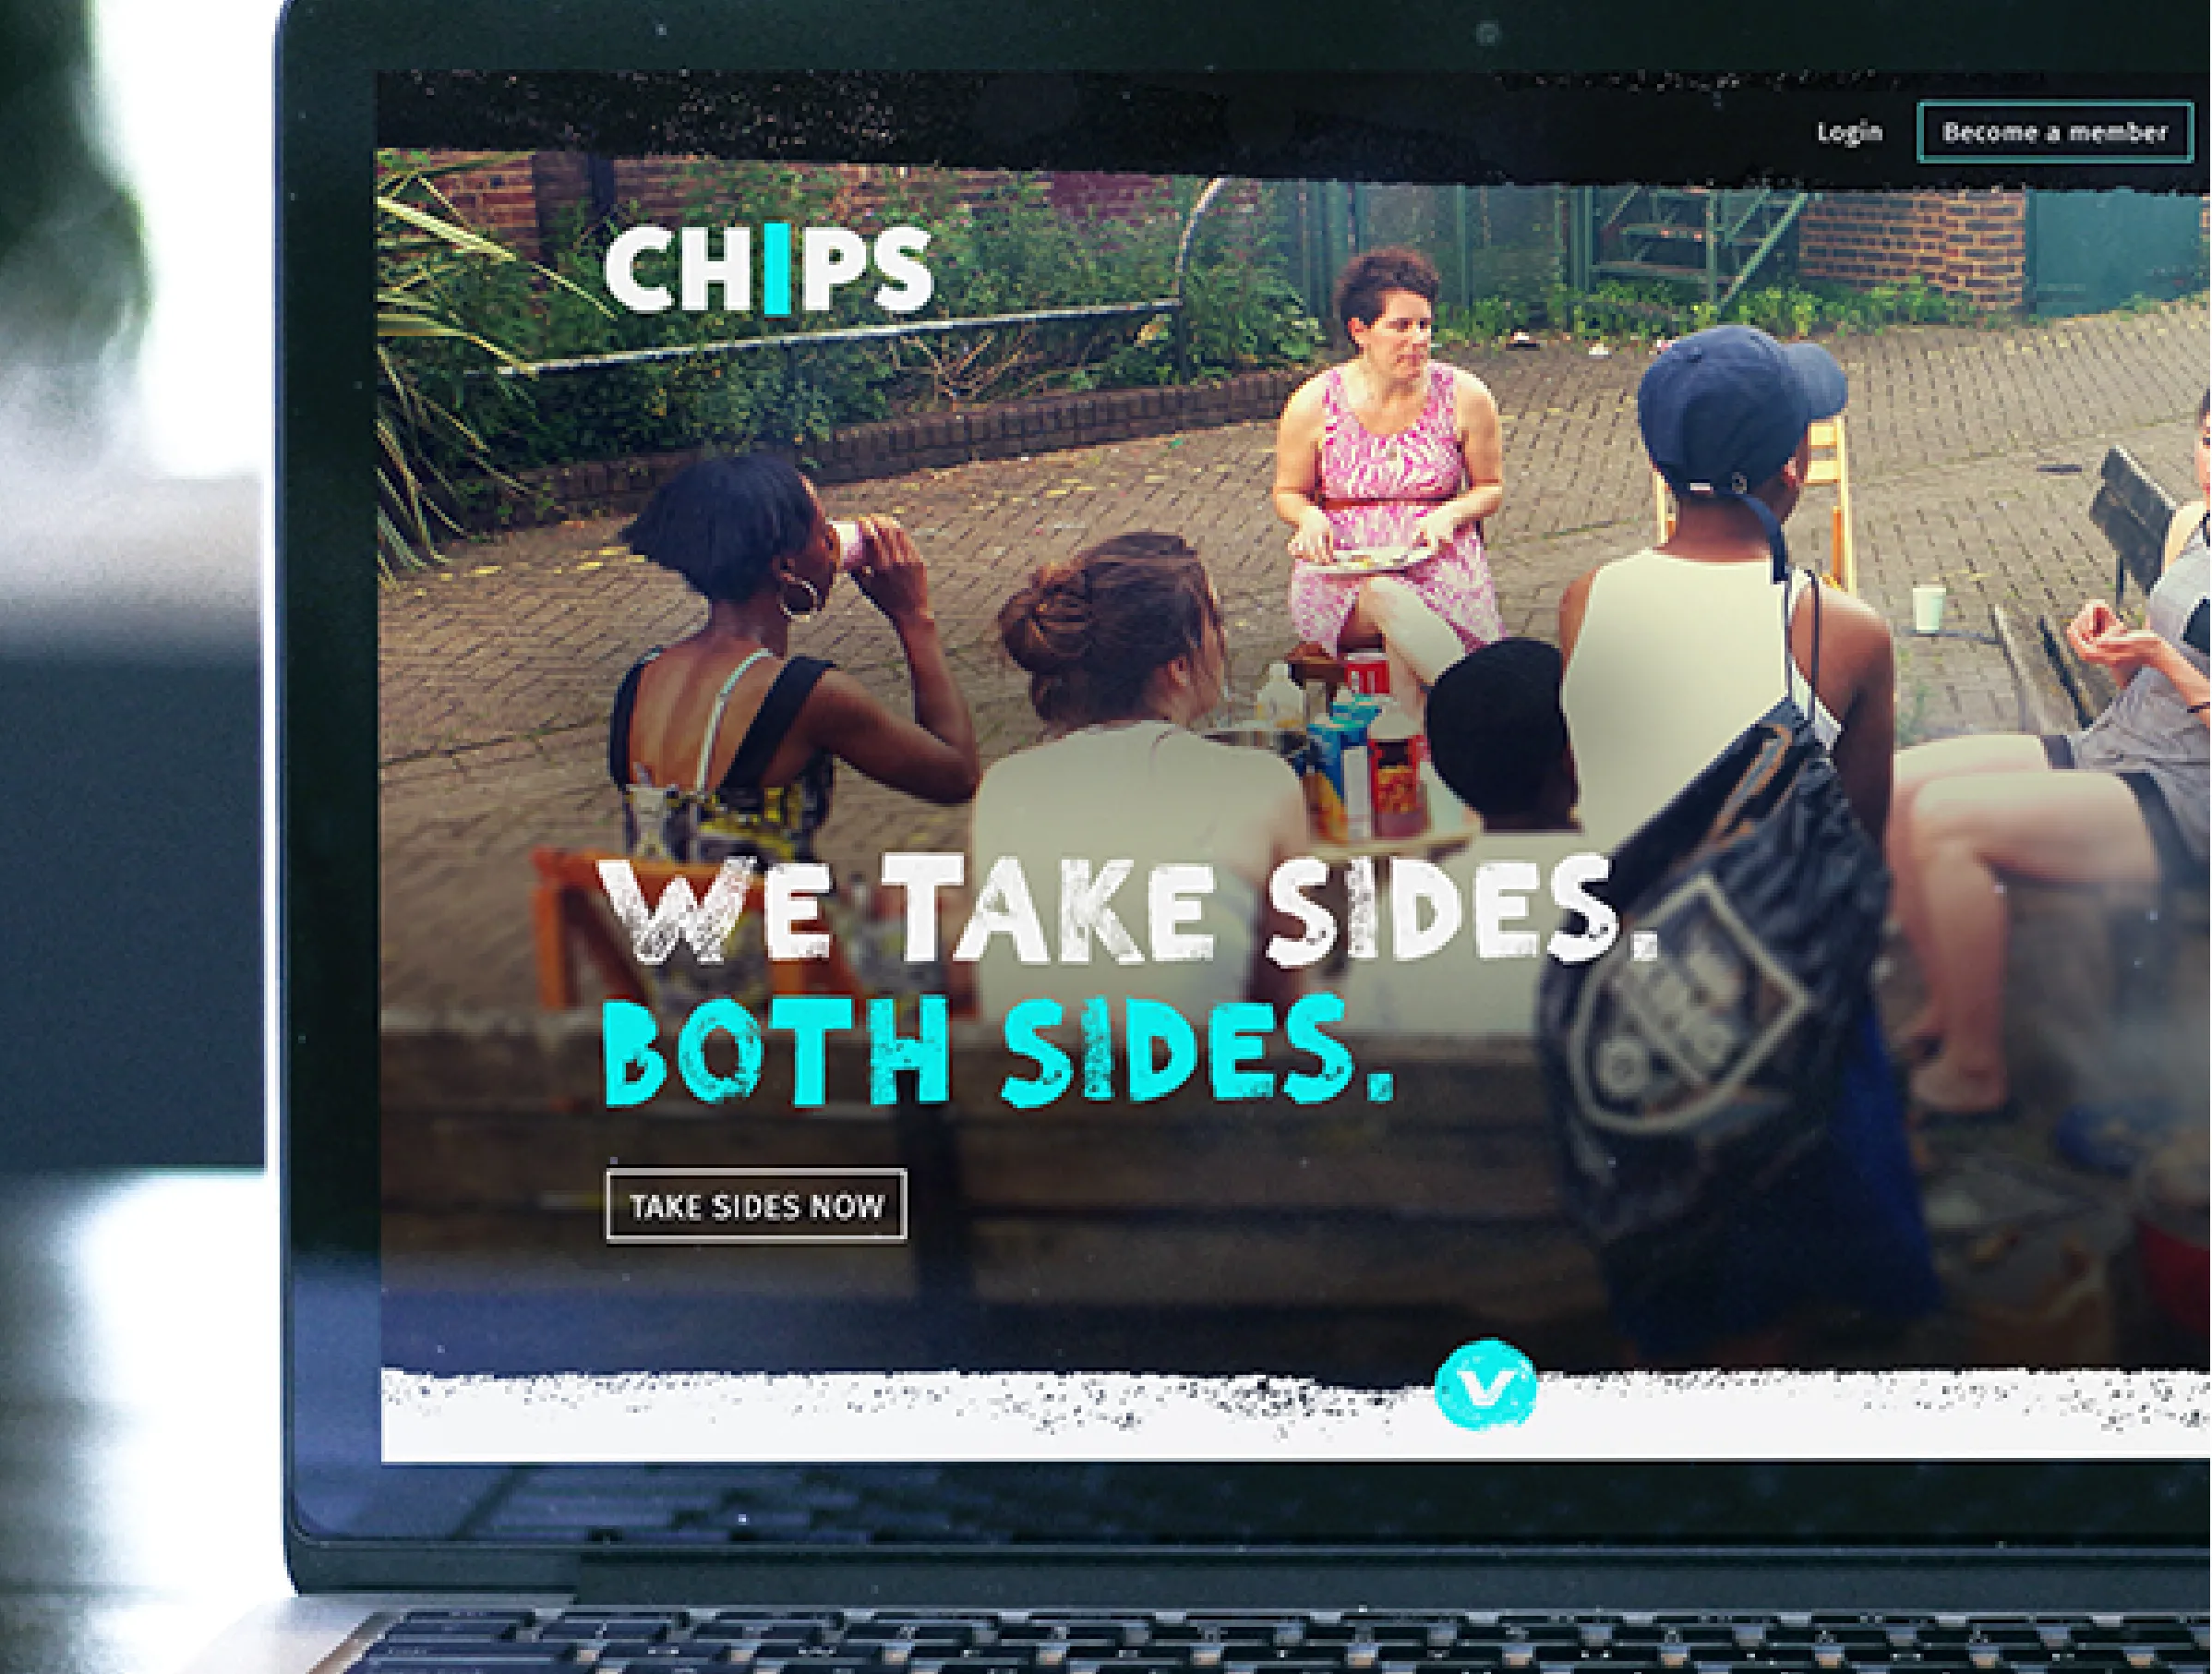 CHIPS charity brand translated to website